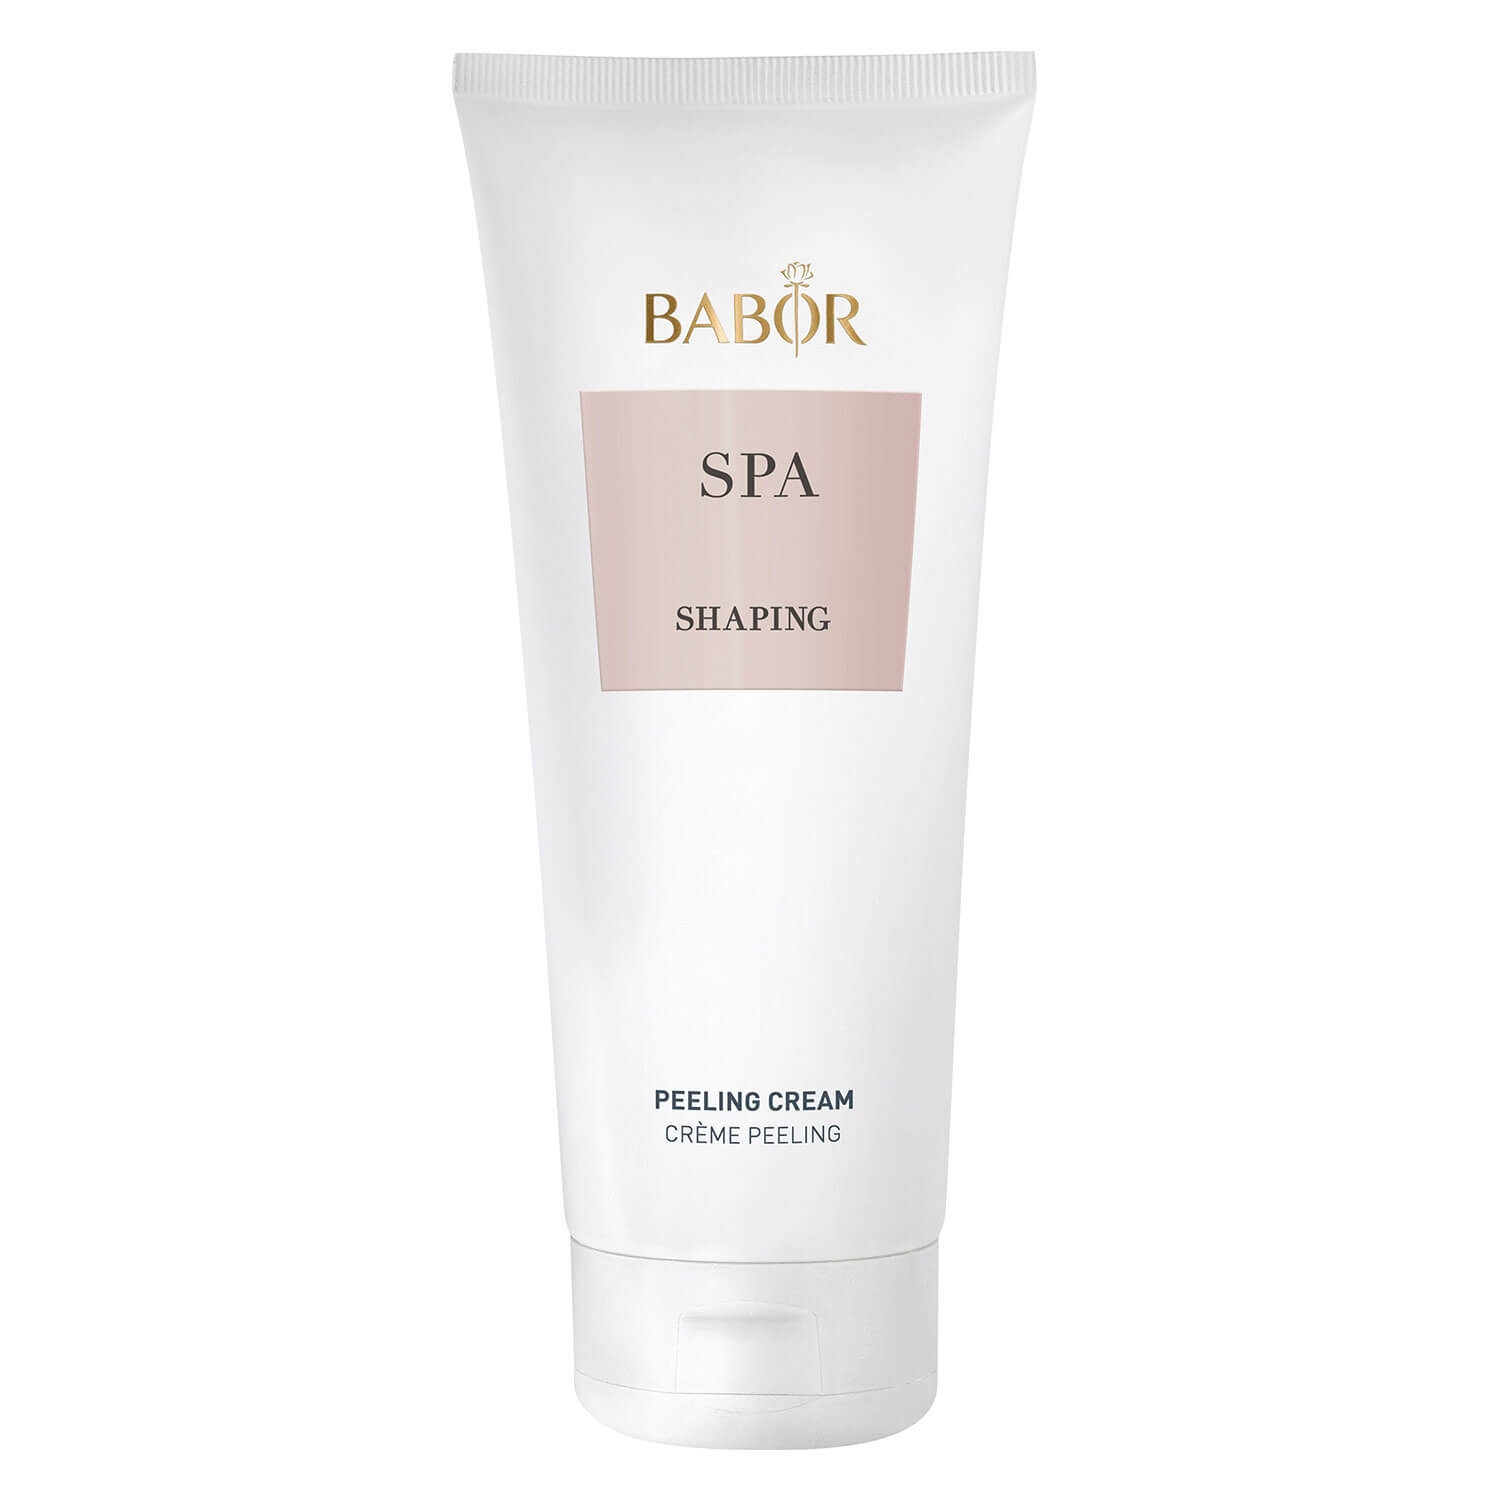 Product image from BABOR SPA - Shaping Peeling Cream